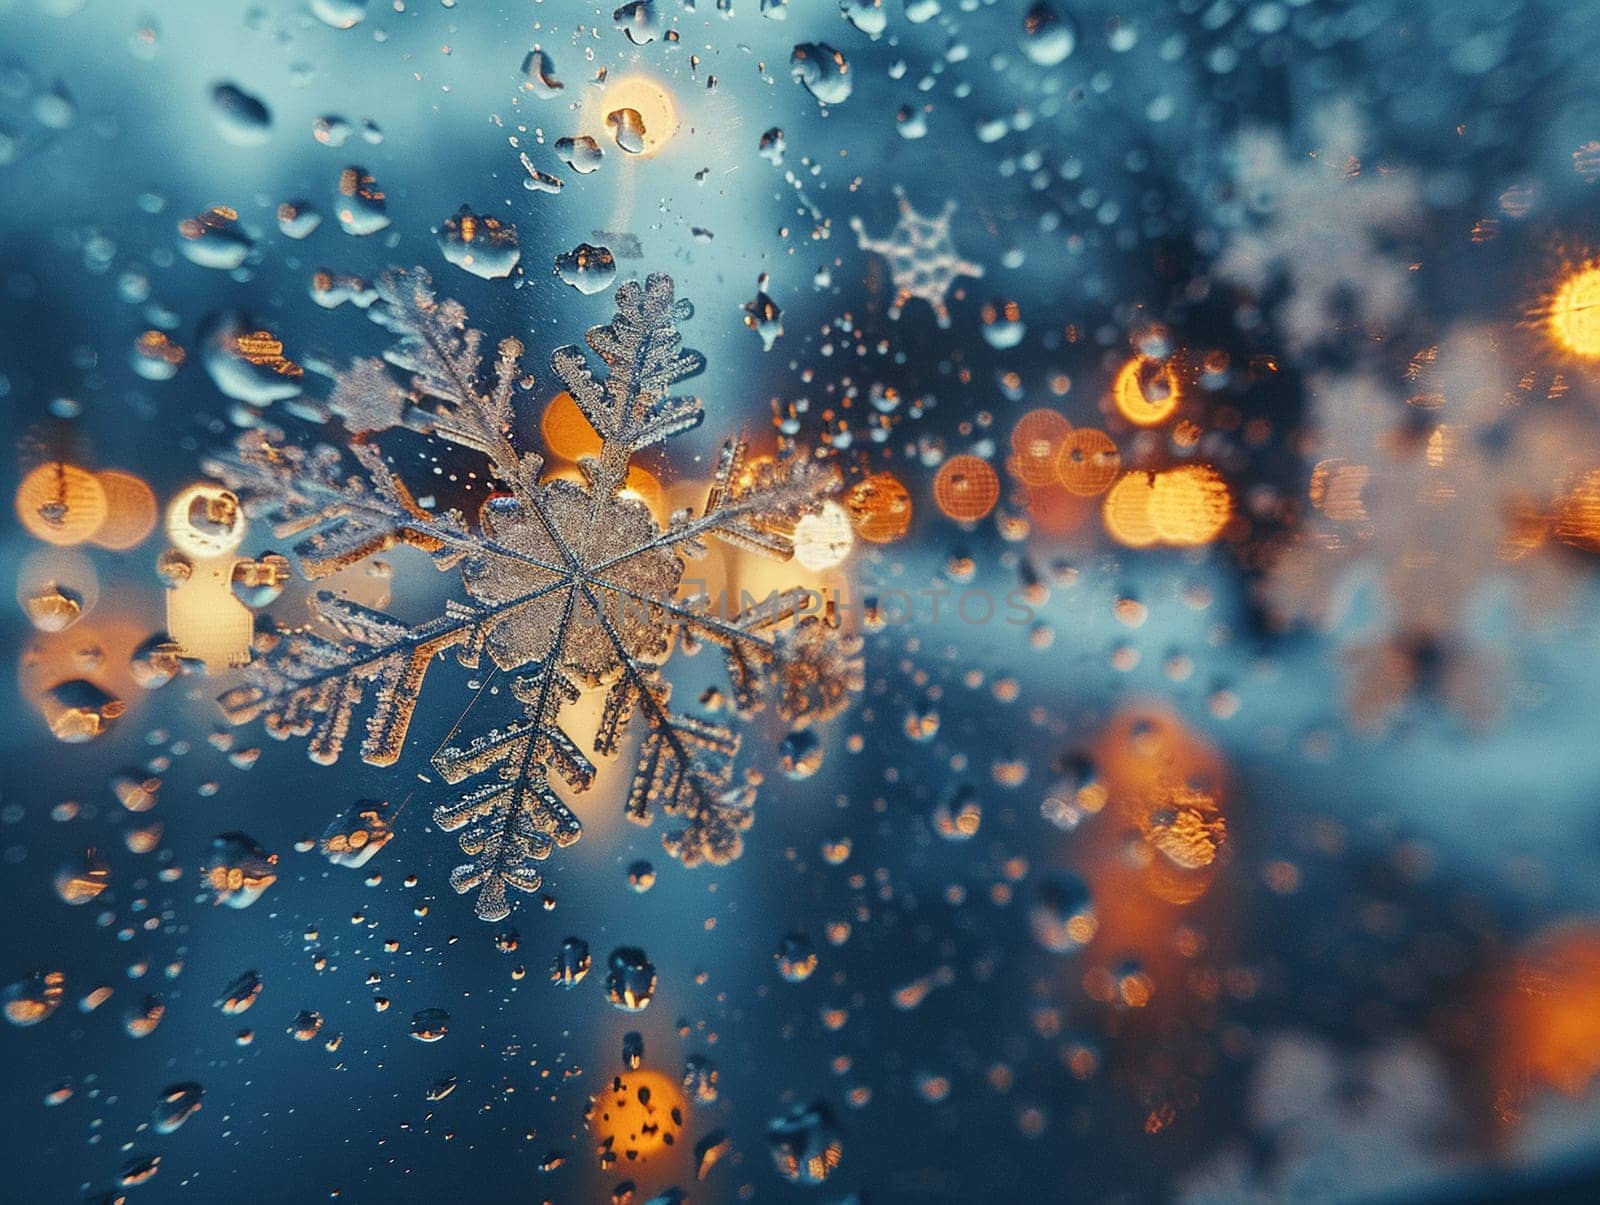 Icy snowflakes on a window pane by Benzoix